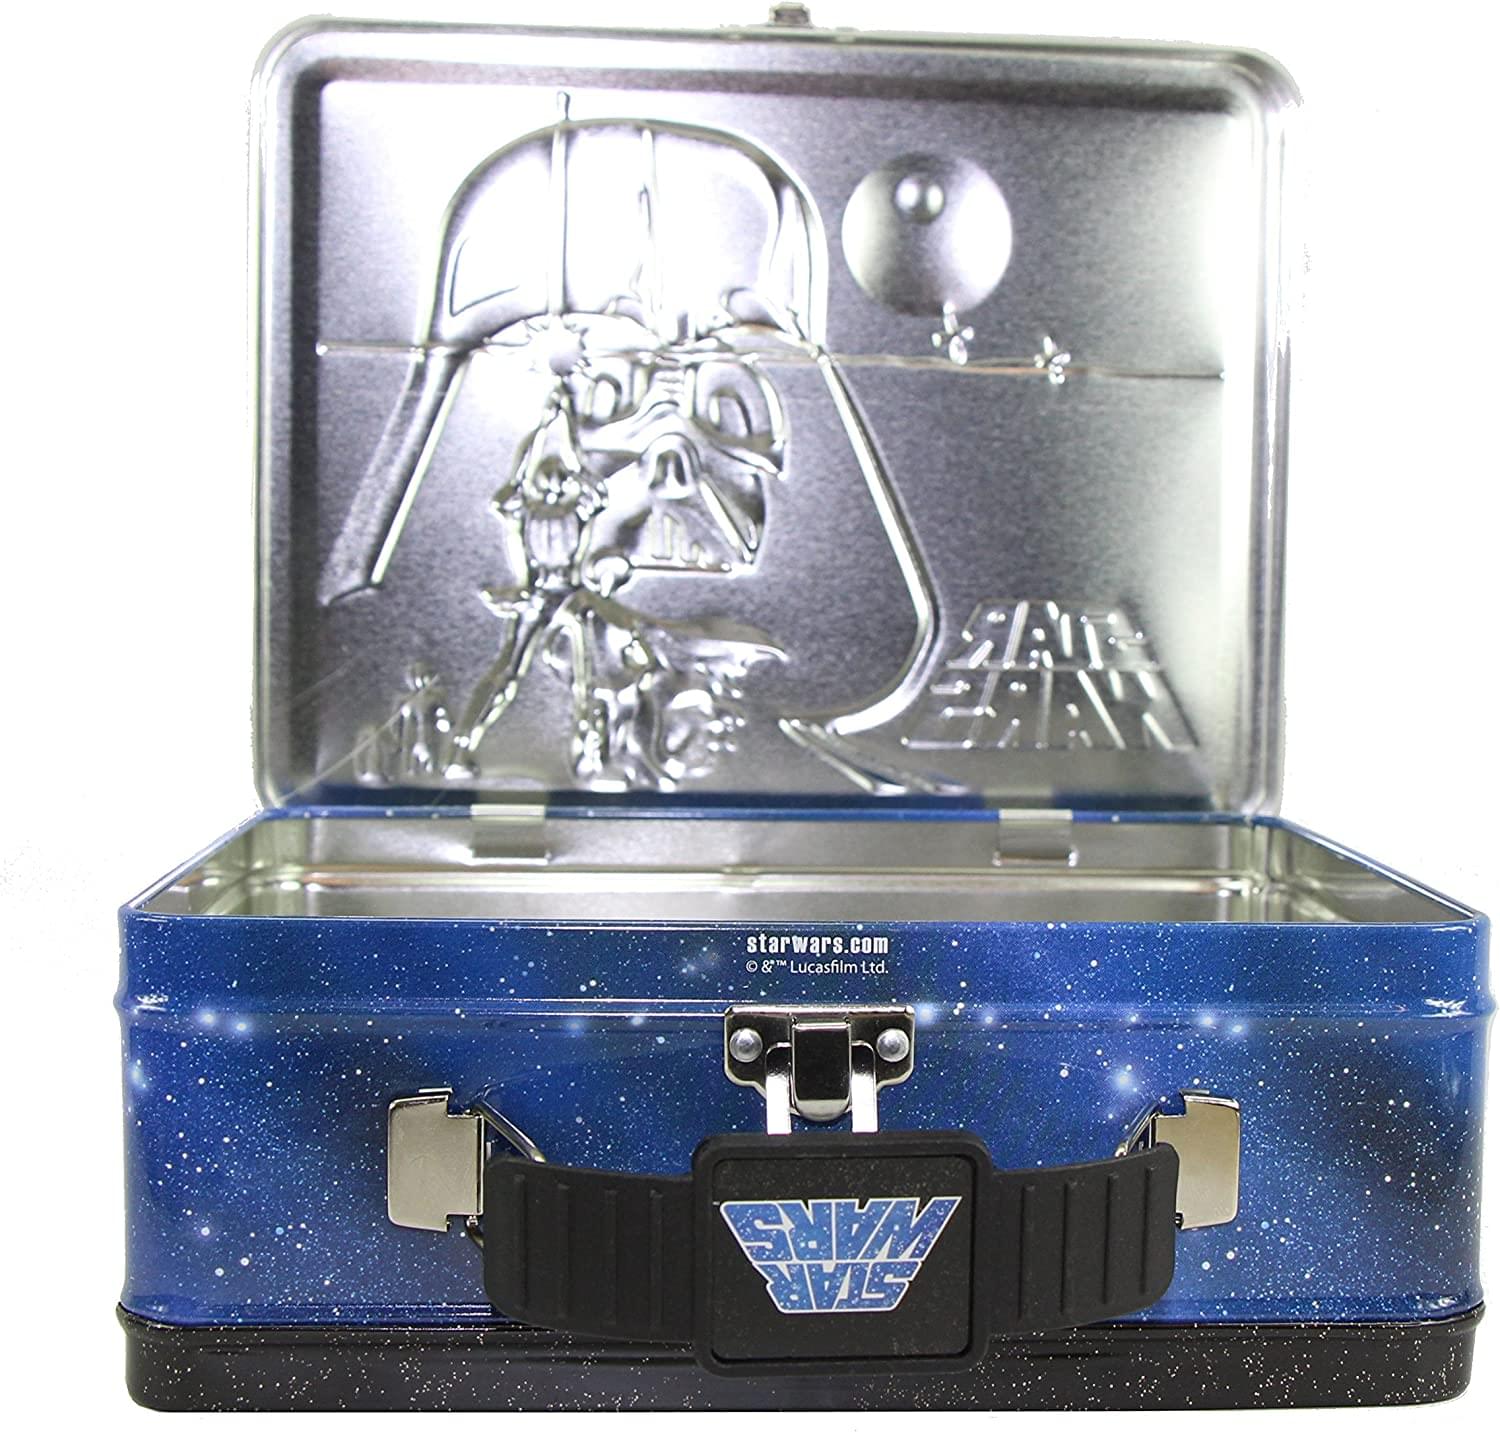 Star Wars The Empire Strikes Back Tin Lunch Box